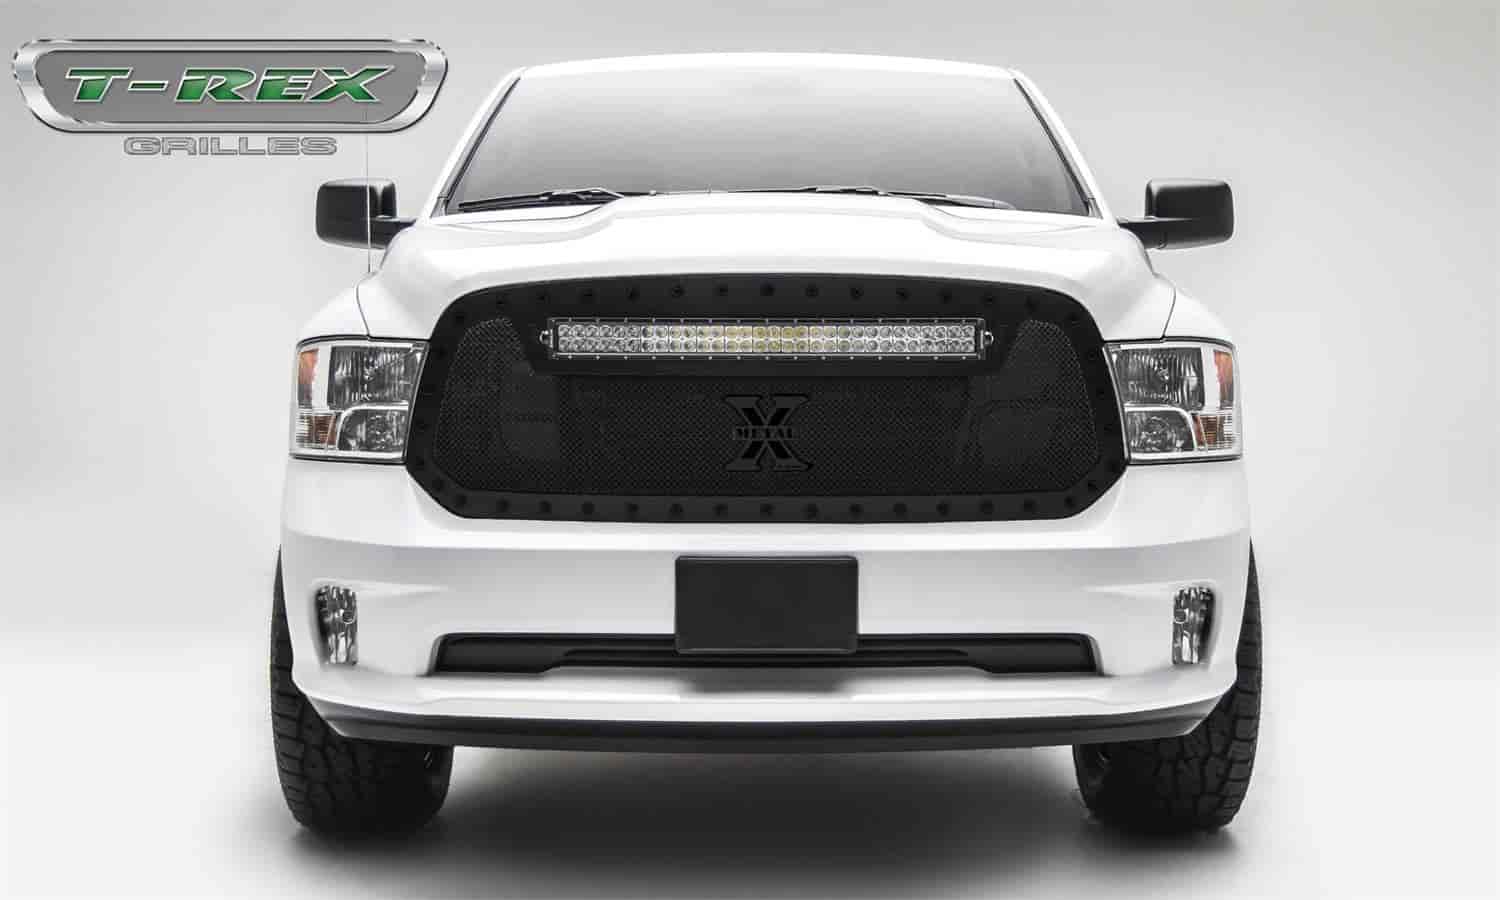 TORCH Series LED Light Grille Single 1 - 30 Curved Light Bar Formed Mesh Grille Main Replacement 1 P